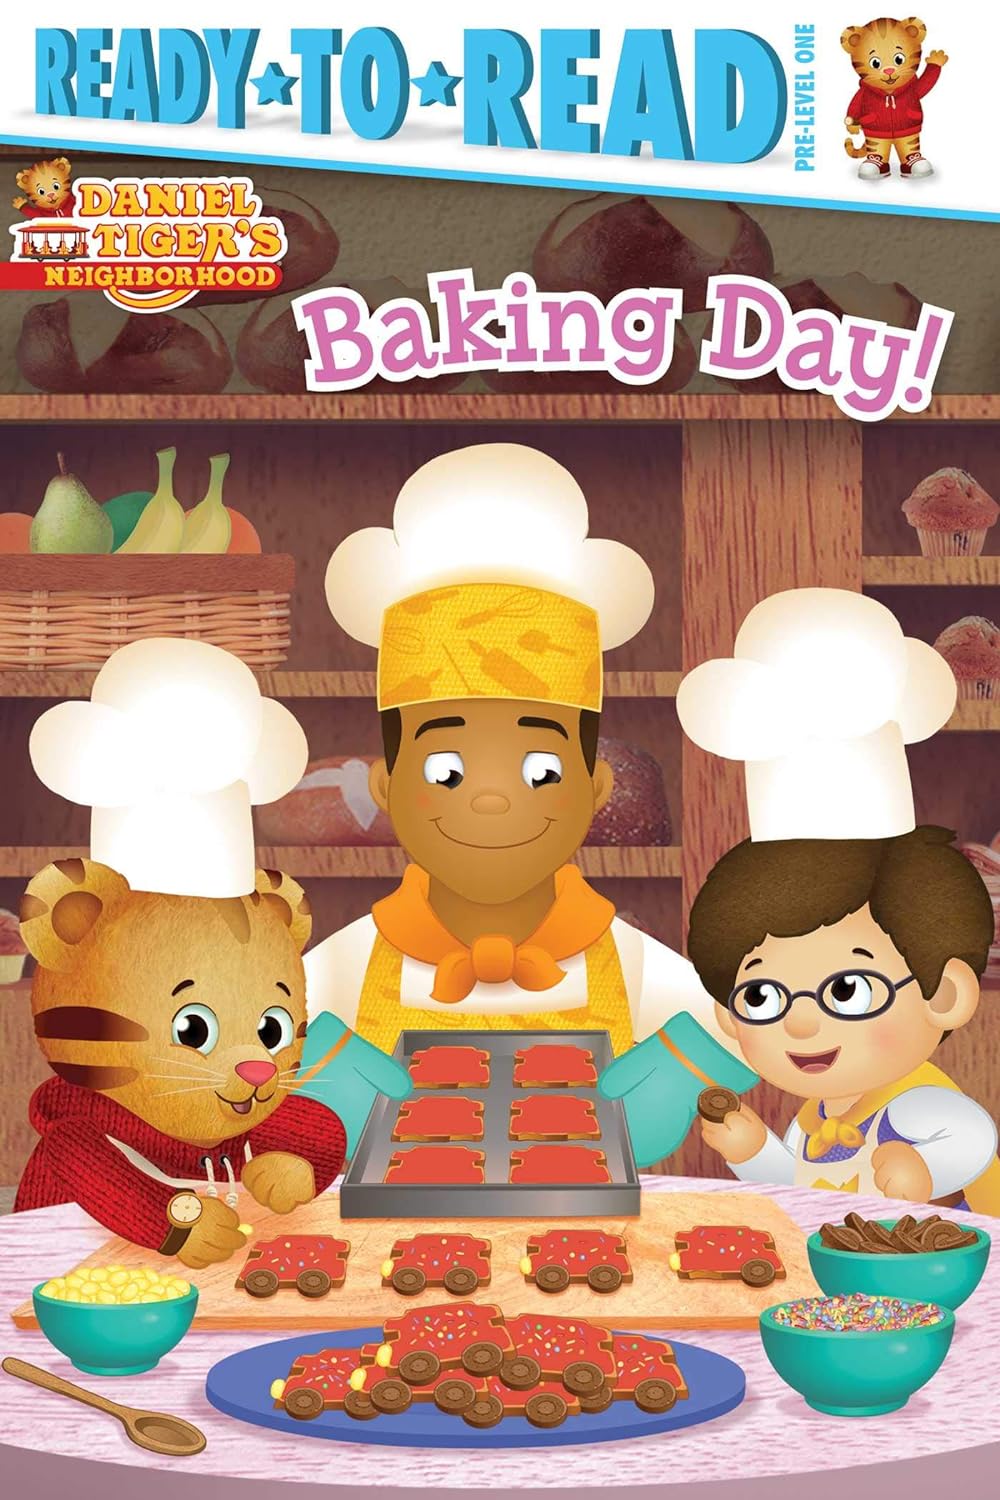 Image for "Baking Day!"